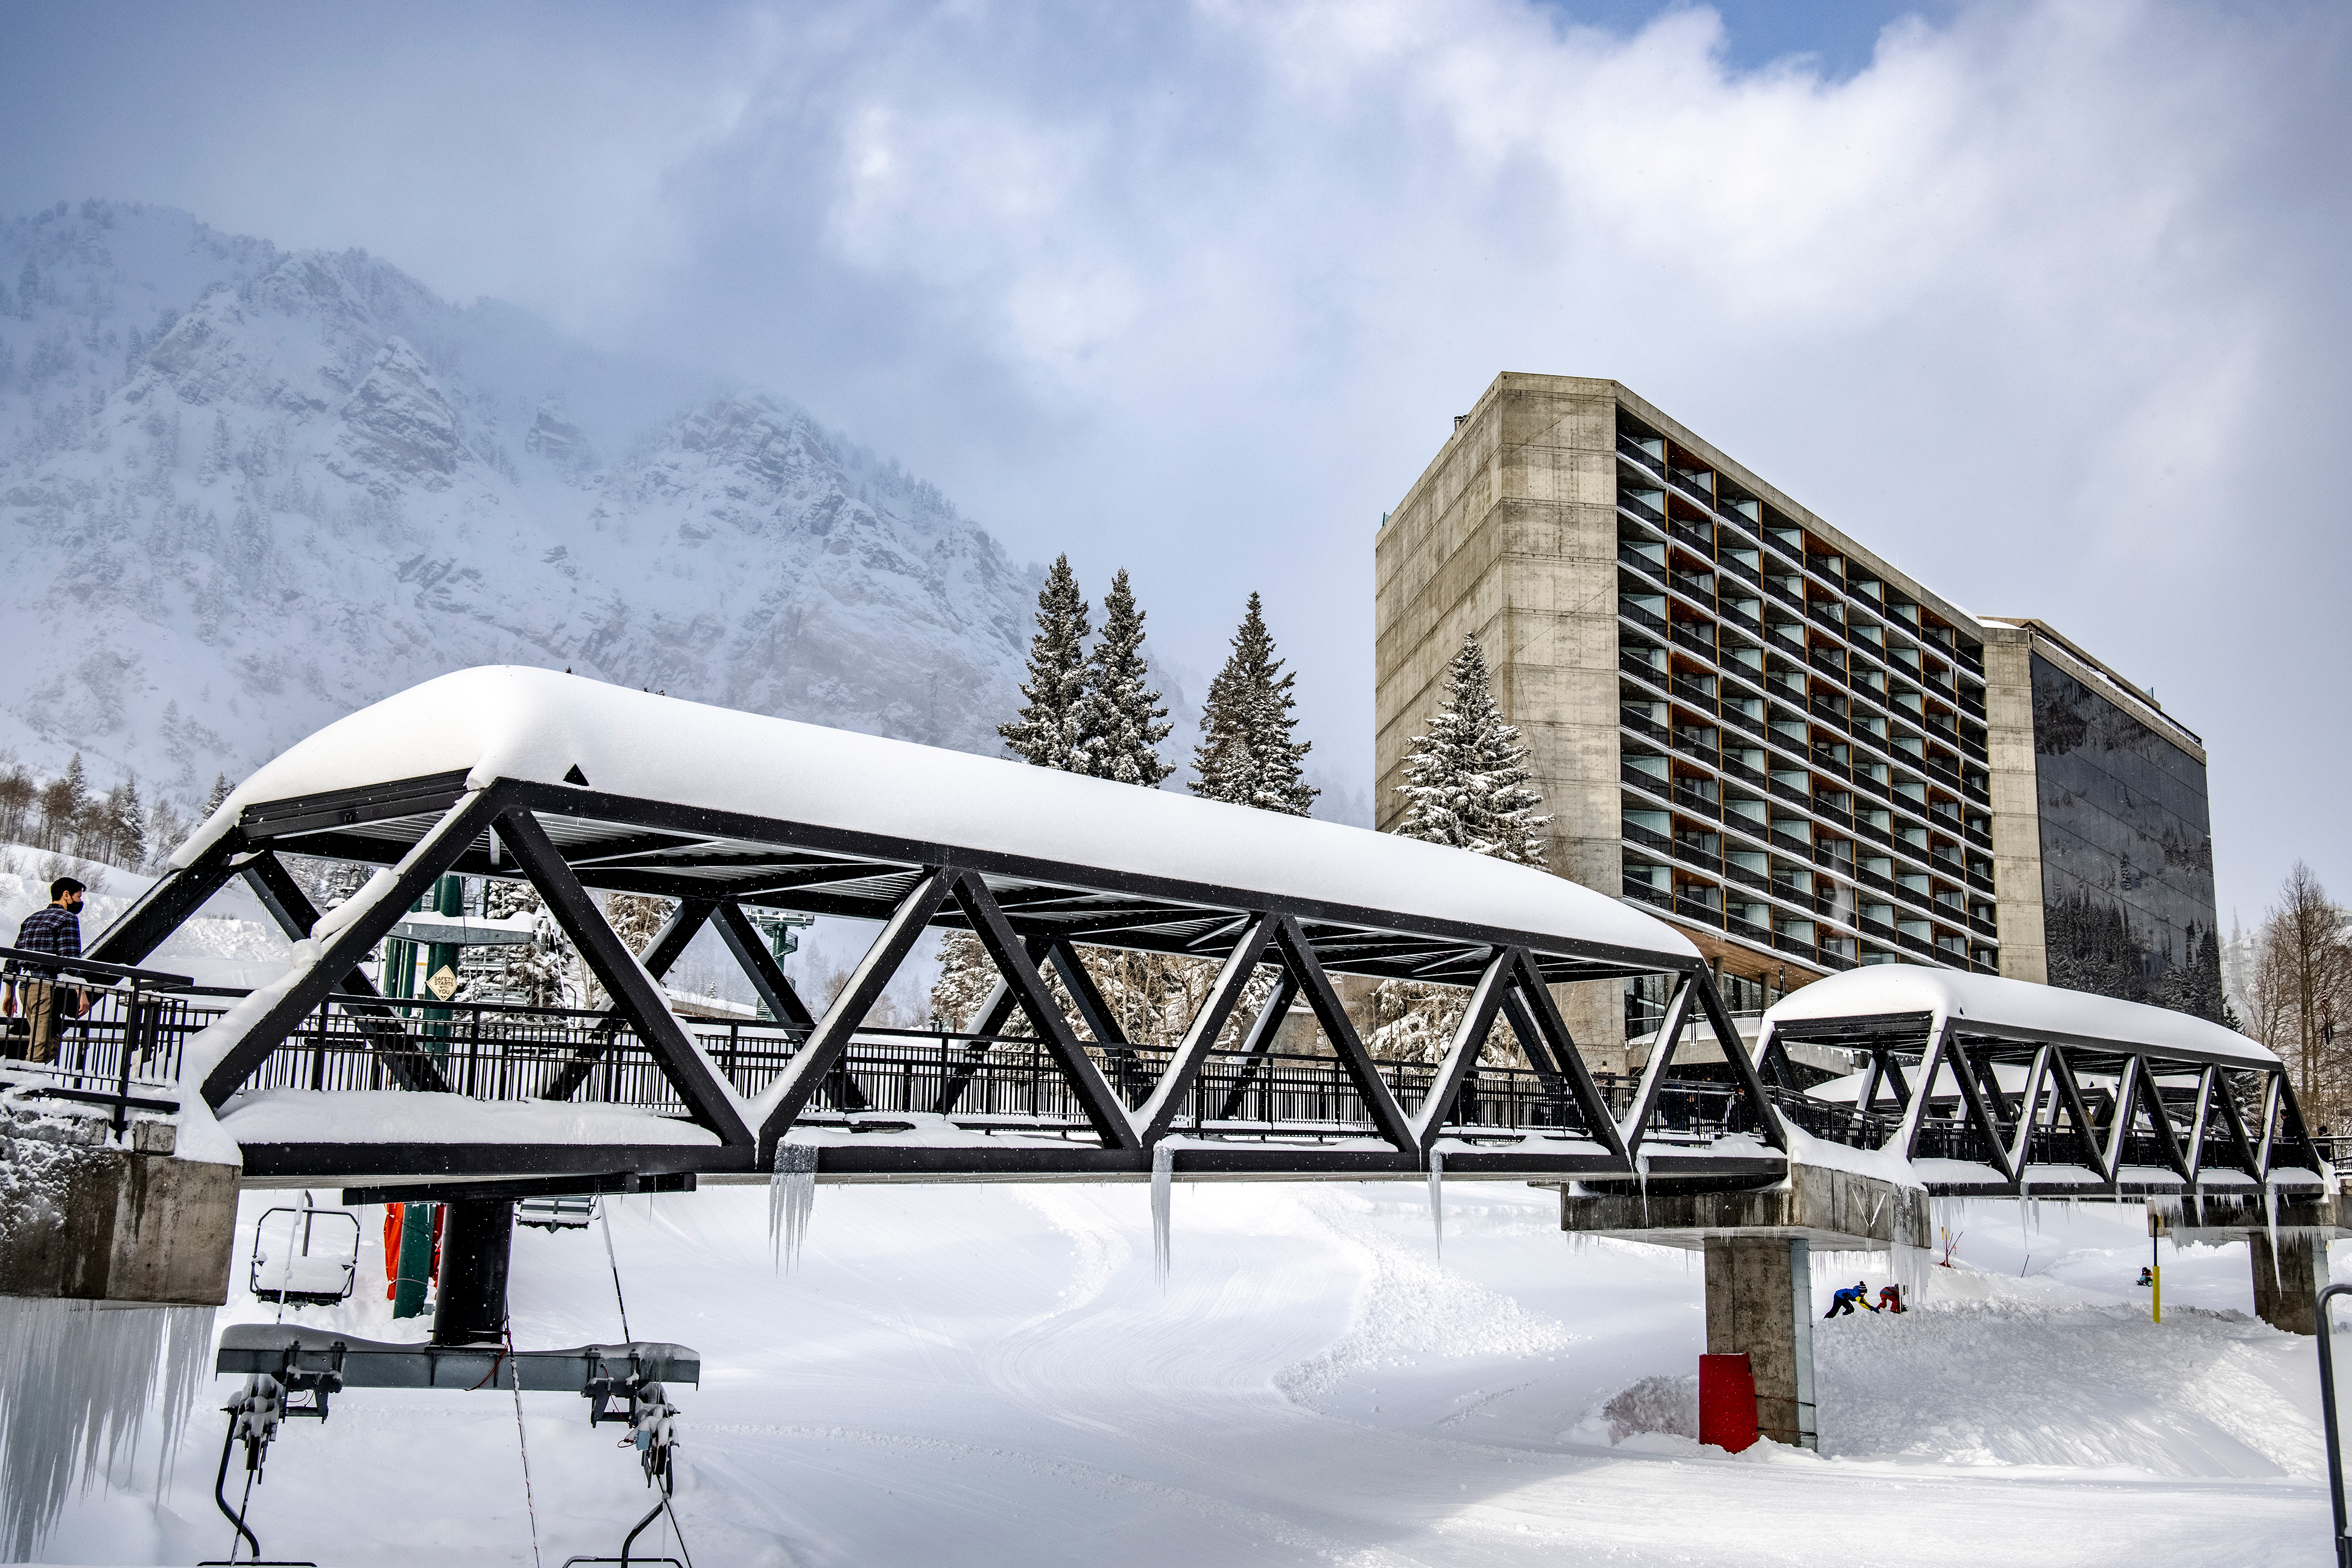 Discounted Lodging with Ten-2-share Snowbird Passes